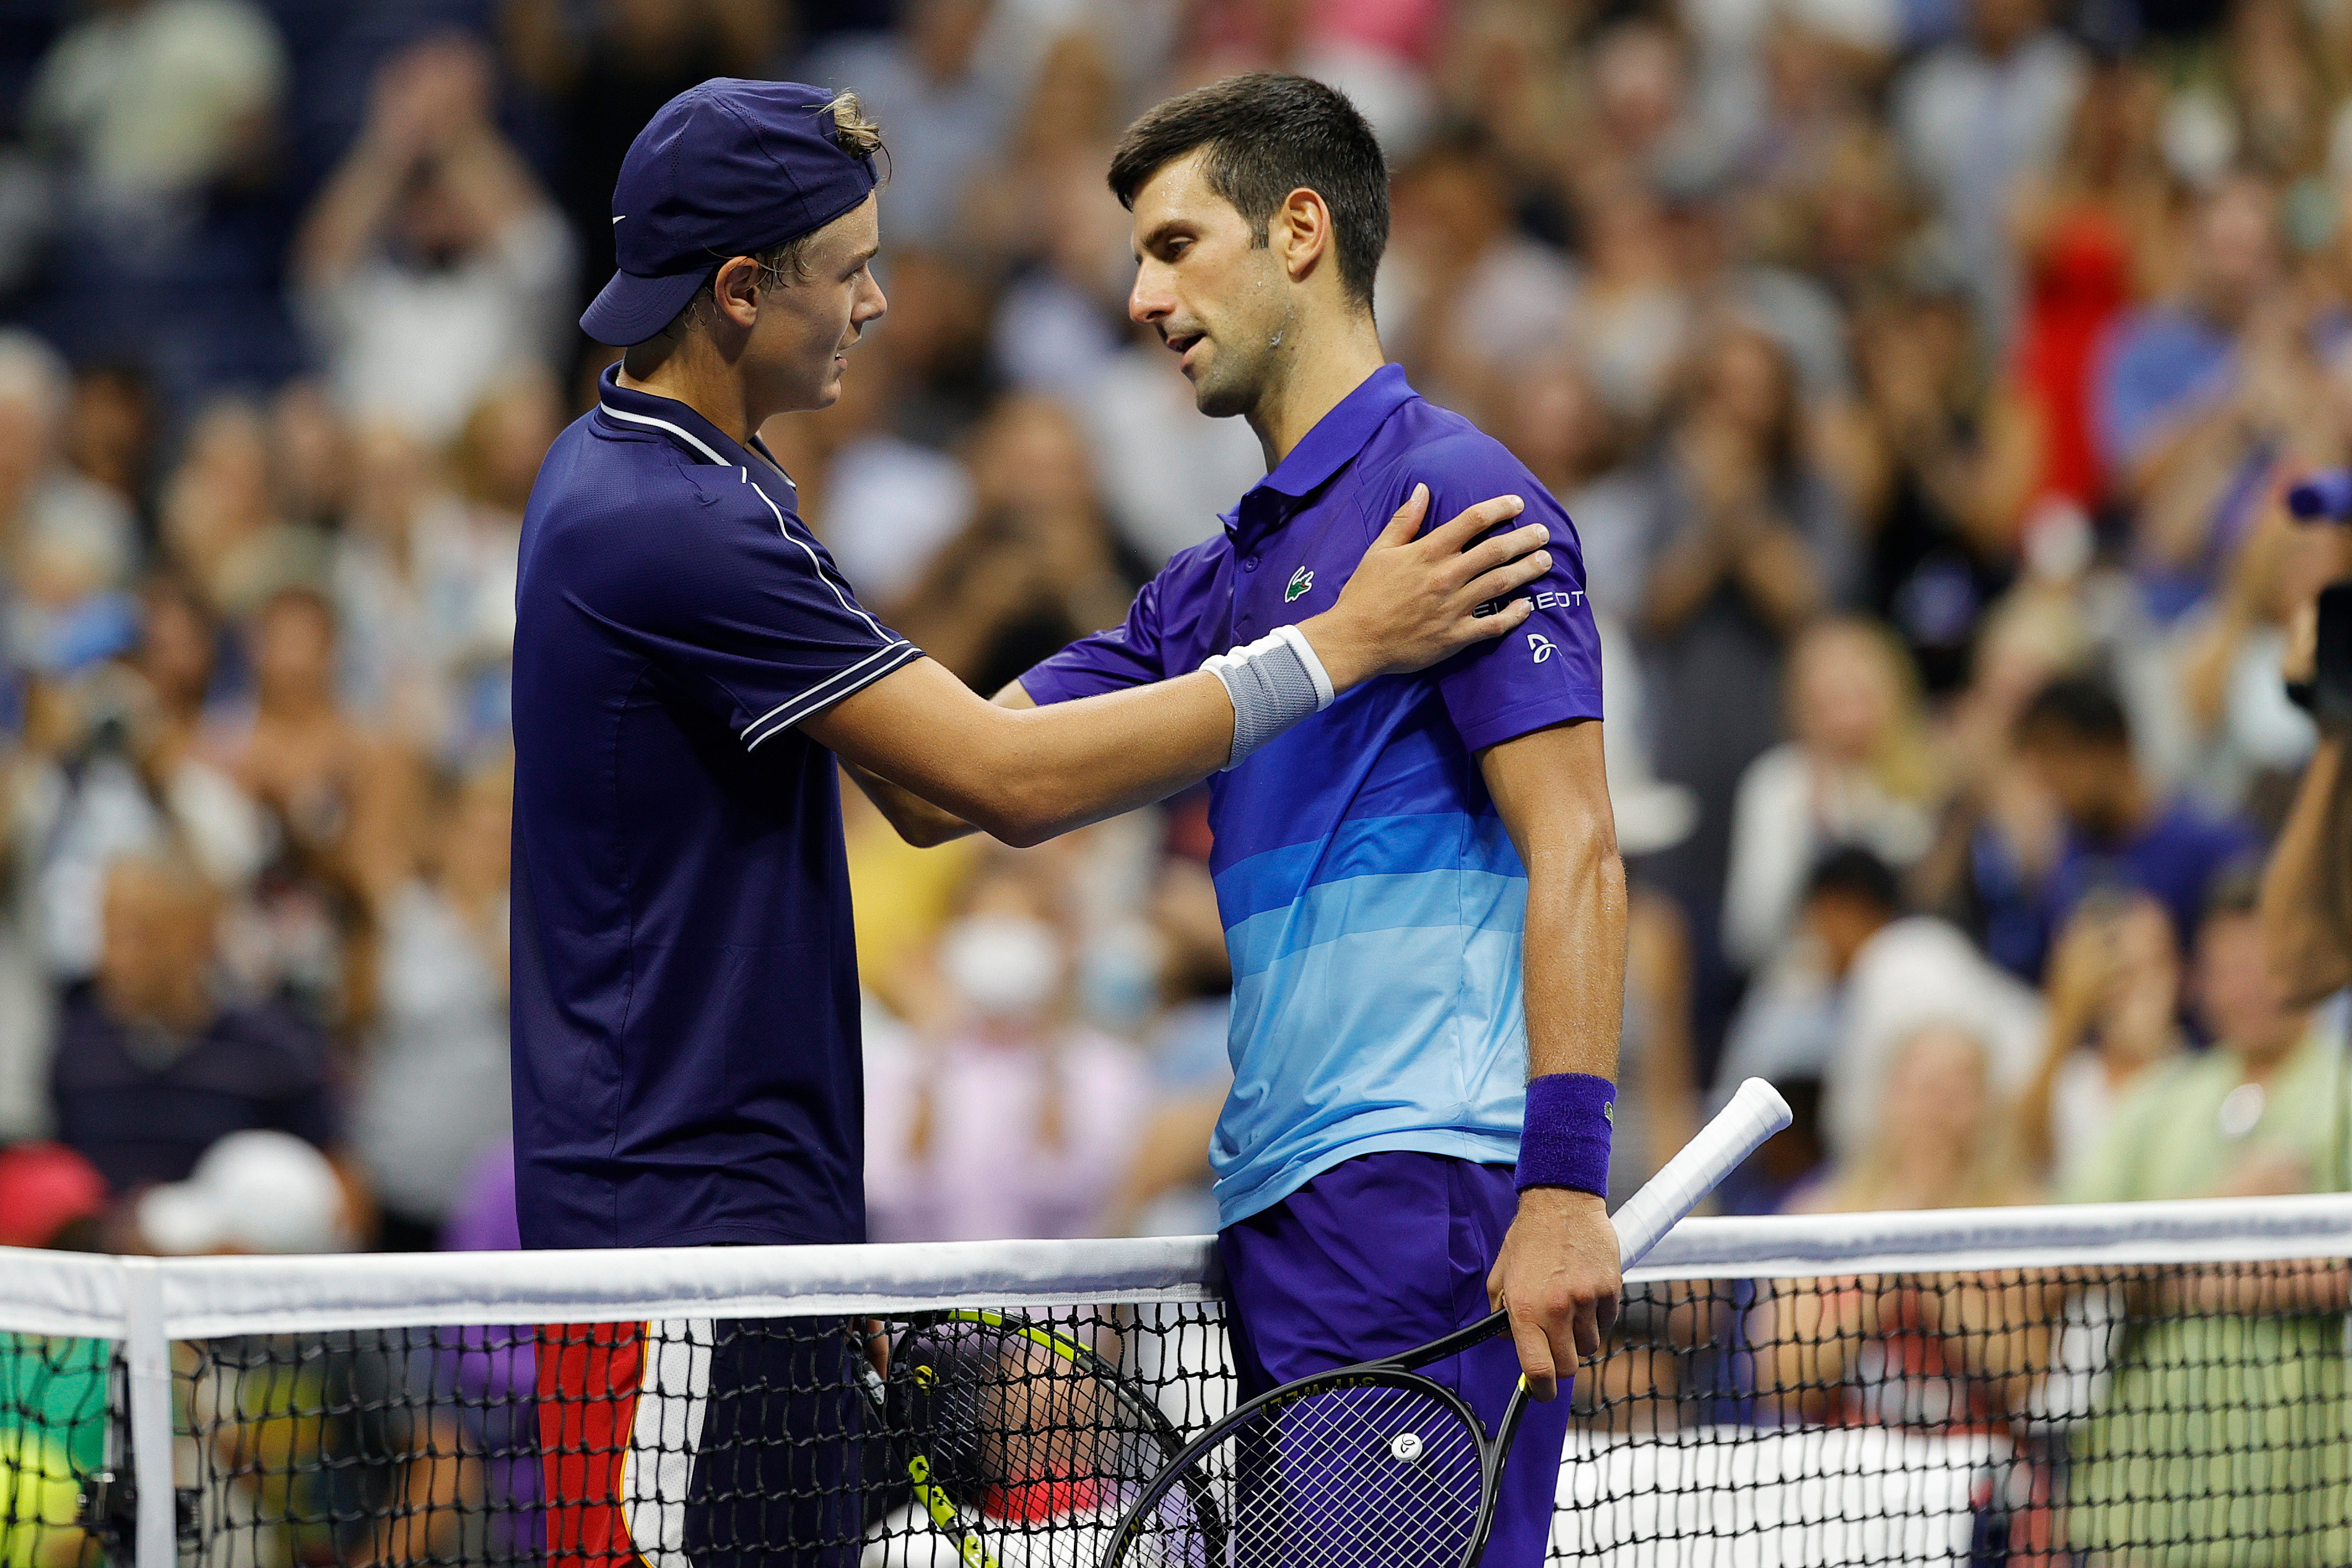 Novak Djokovic reveals what he told ’emotional’ Rune in private chat after US Open scare